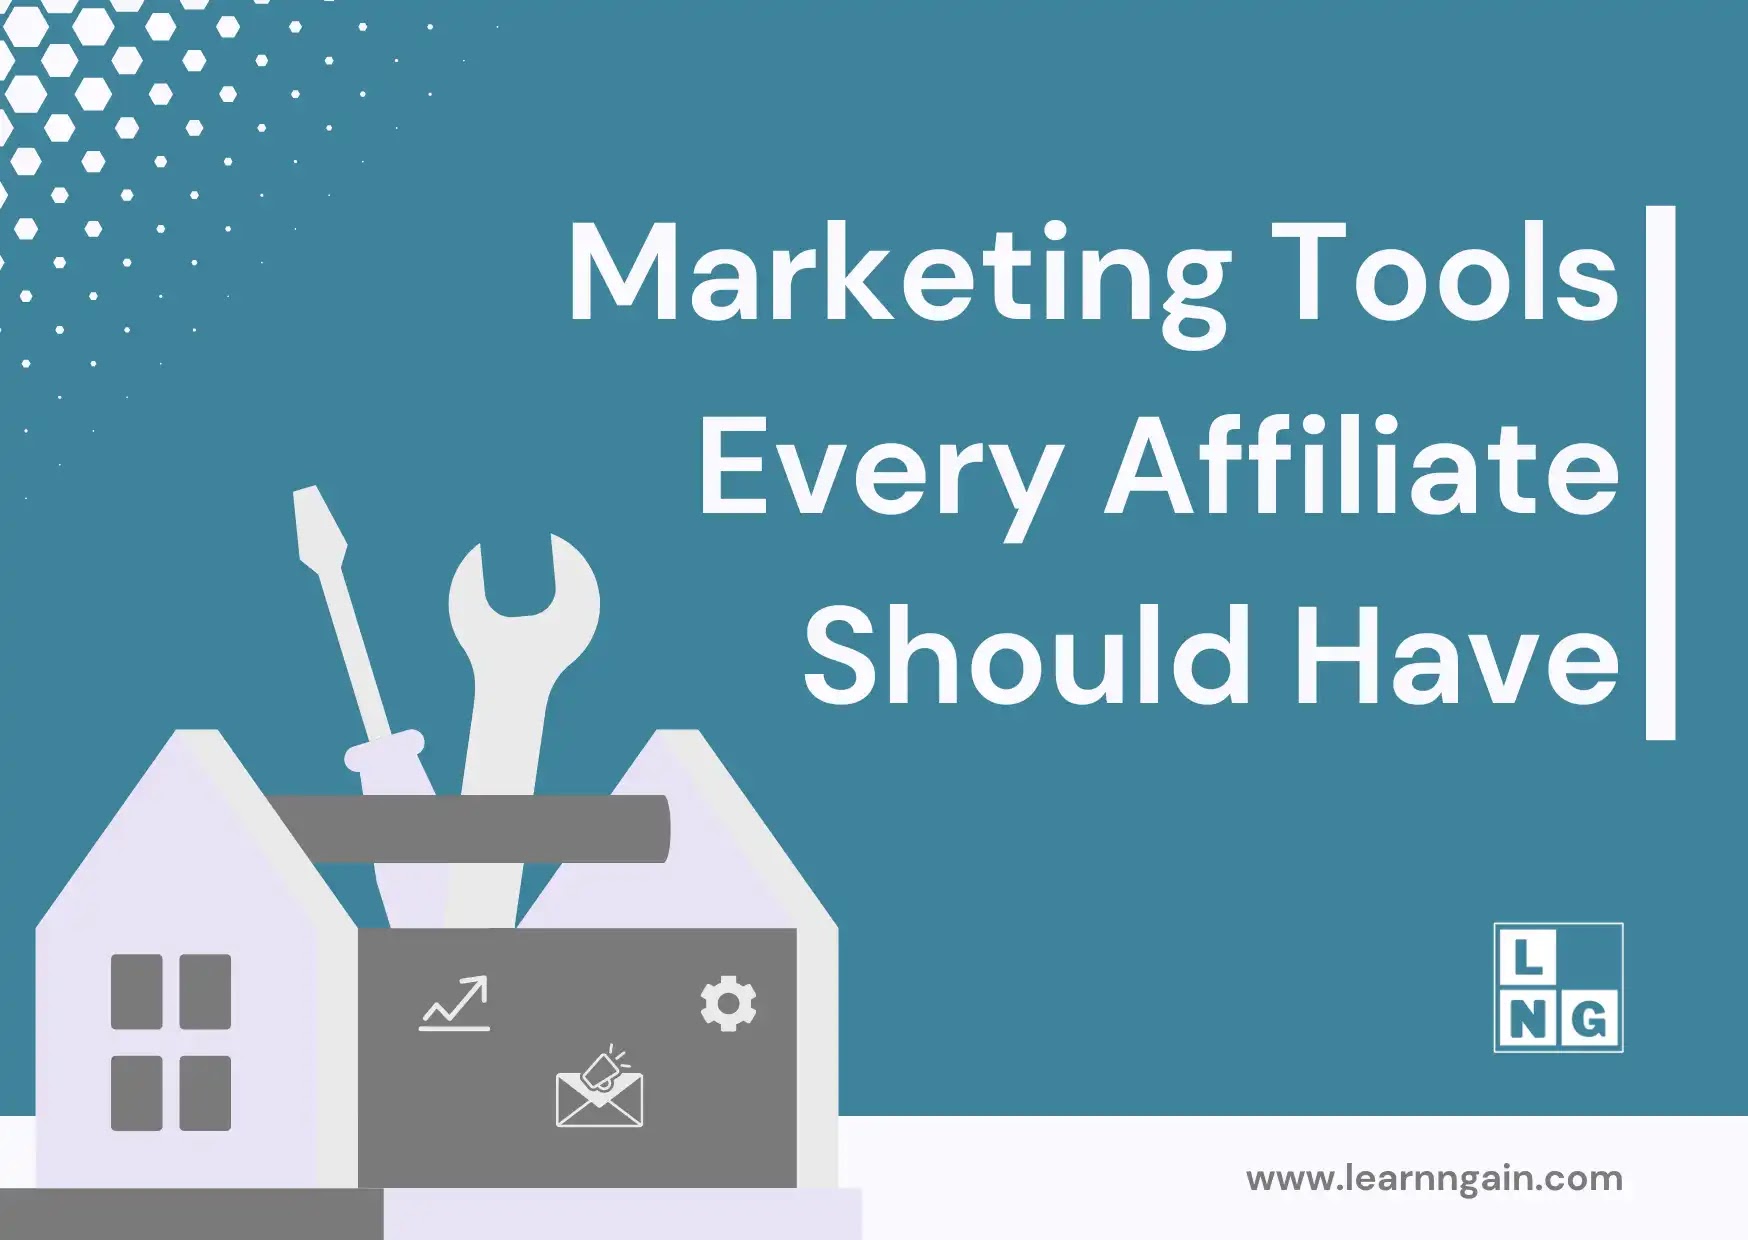 The Top Marketing Tools Every Affiliate Should Have